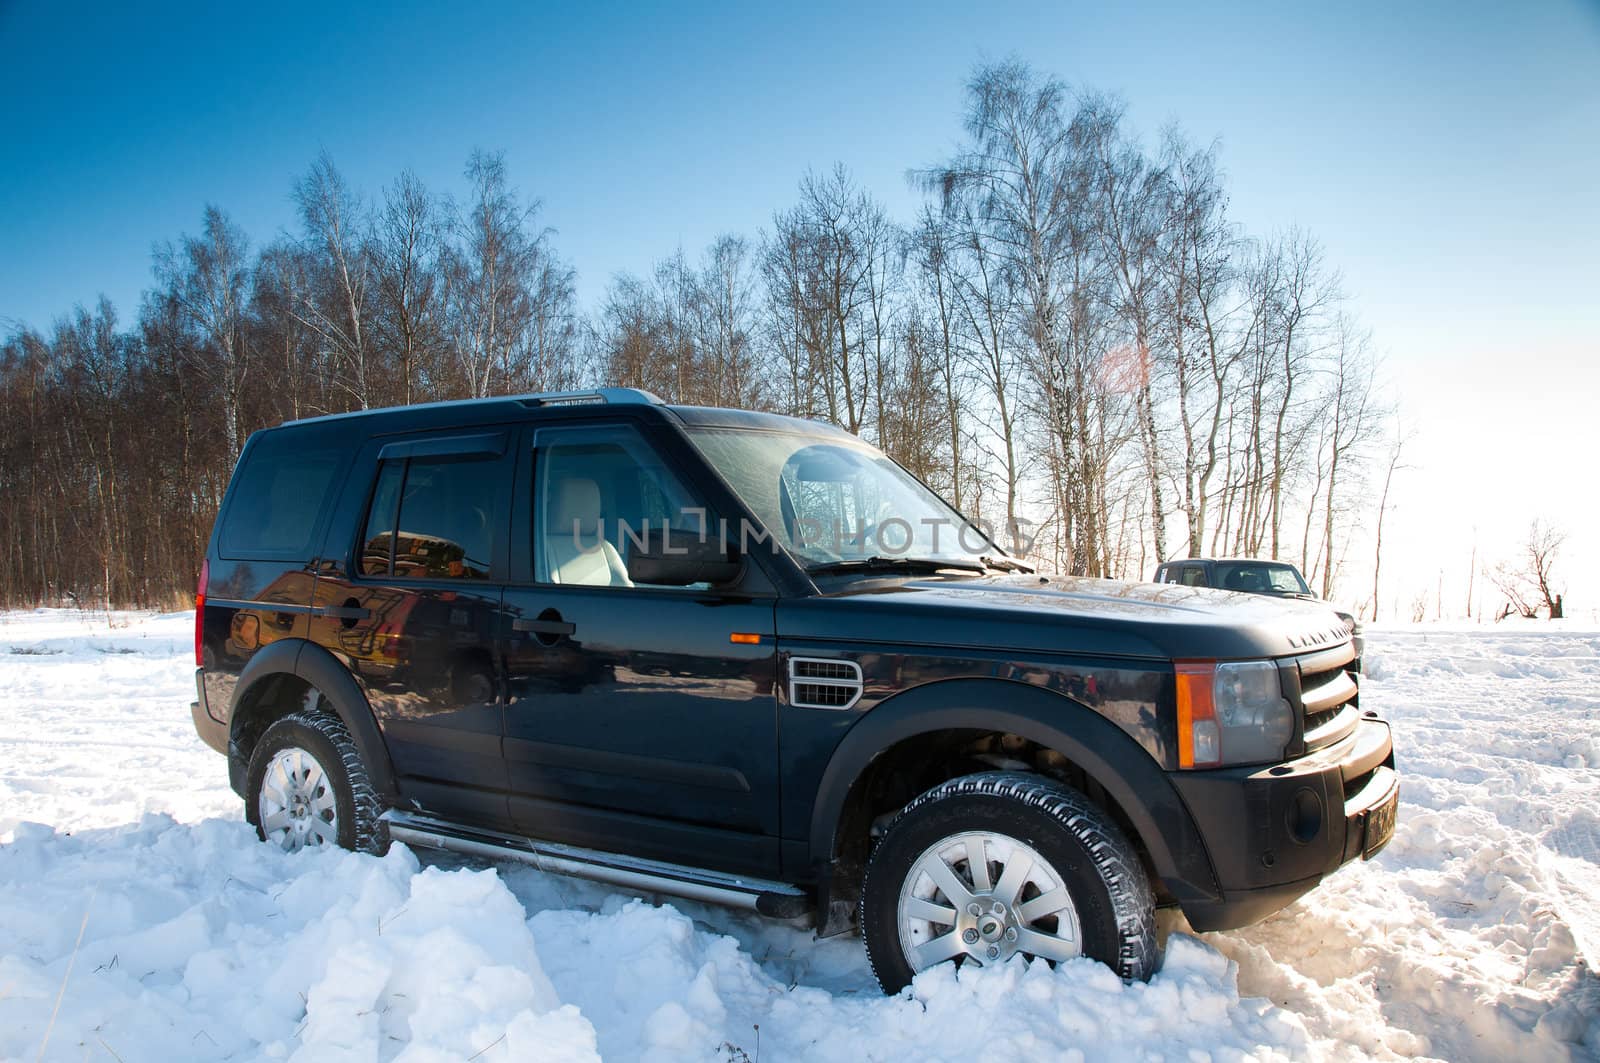 Land Rover Discovery suv.
Car on background the Russian winter.
February 19, 2011. Mattrazz Trophy # 18